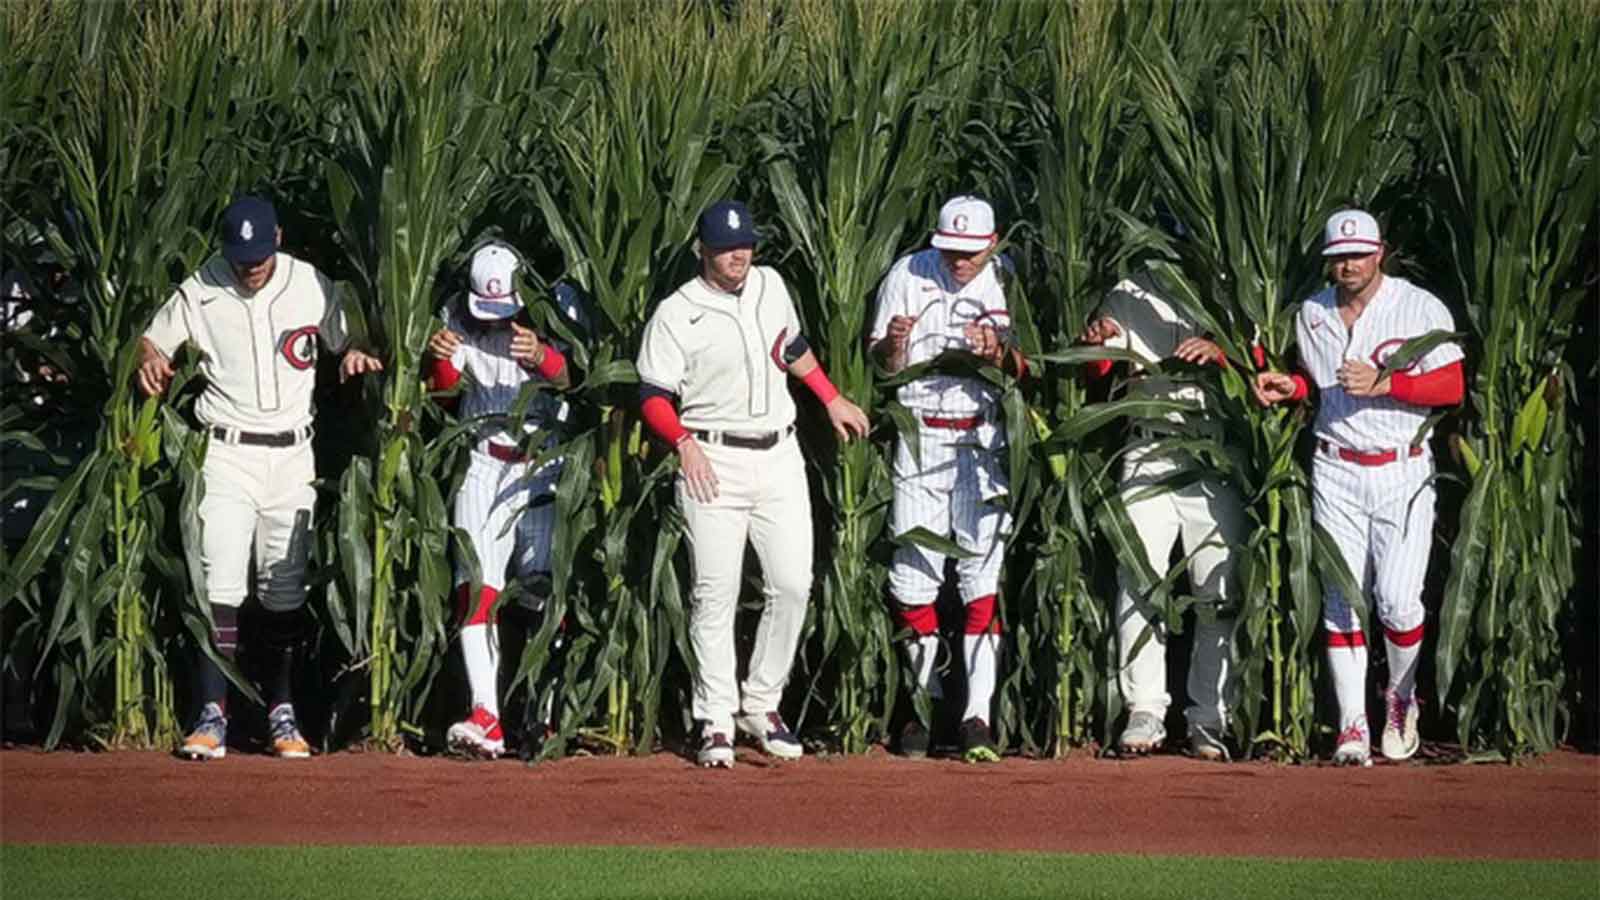 Is there an MLB Field of Dreams game in 2023?